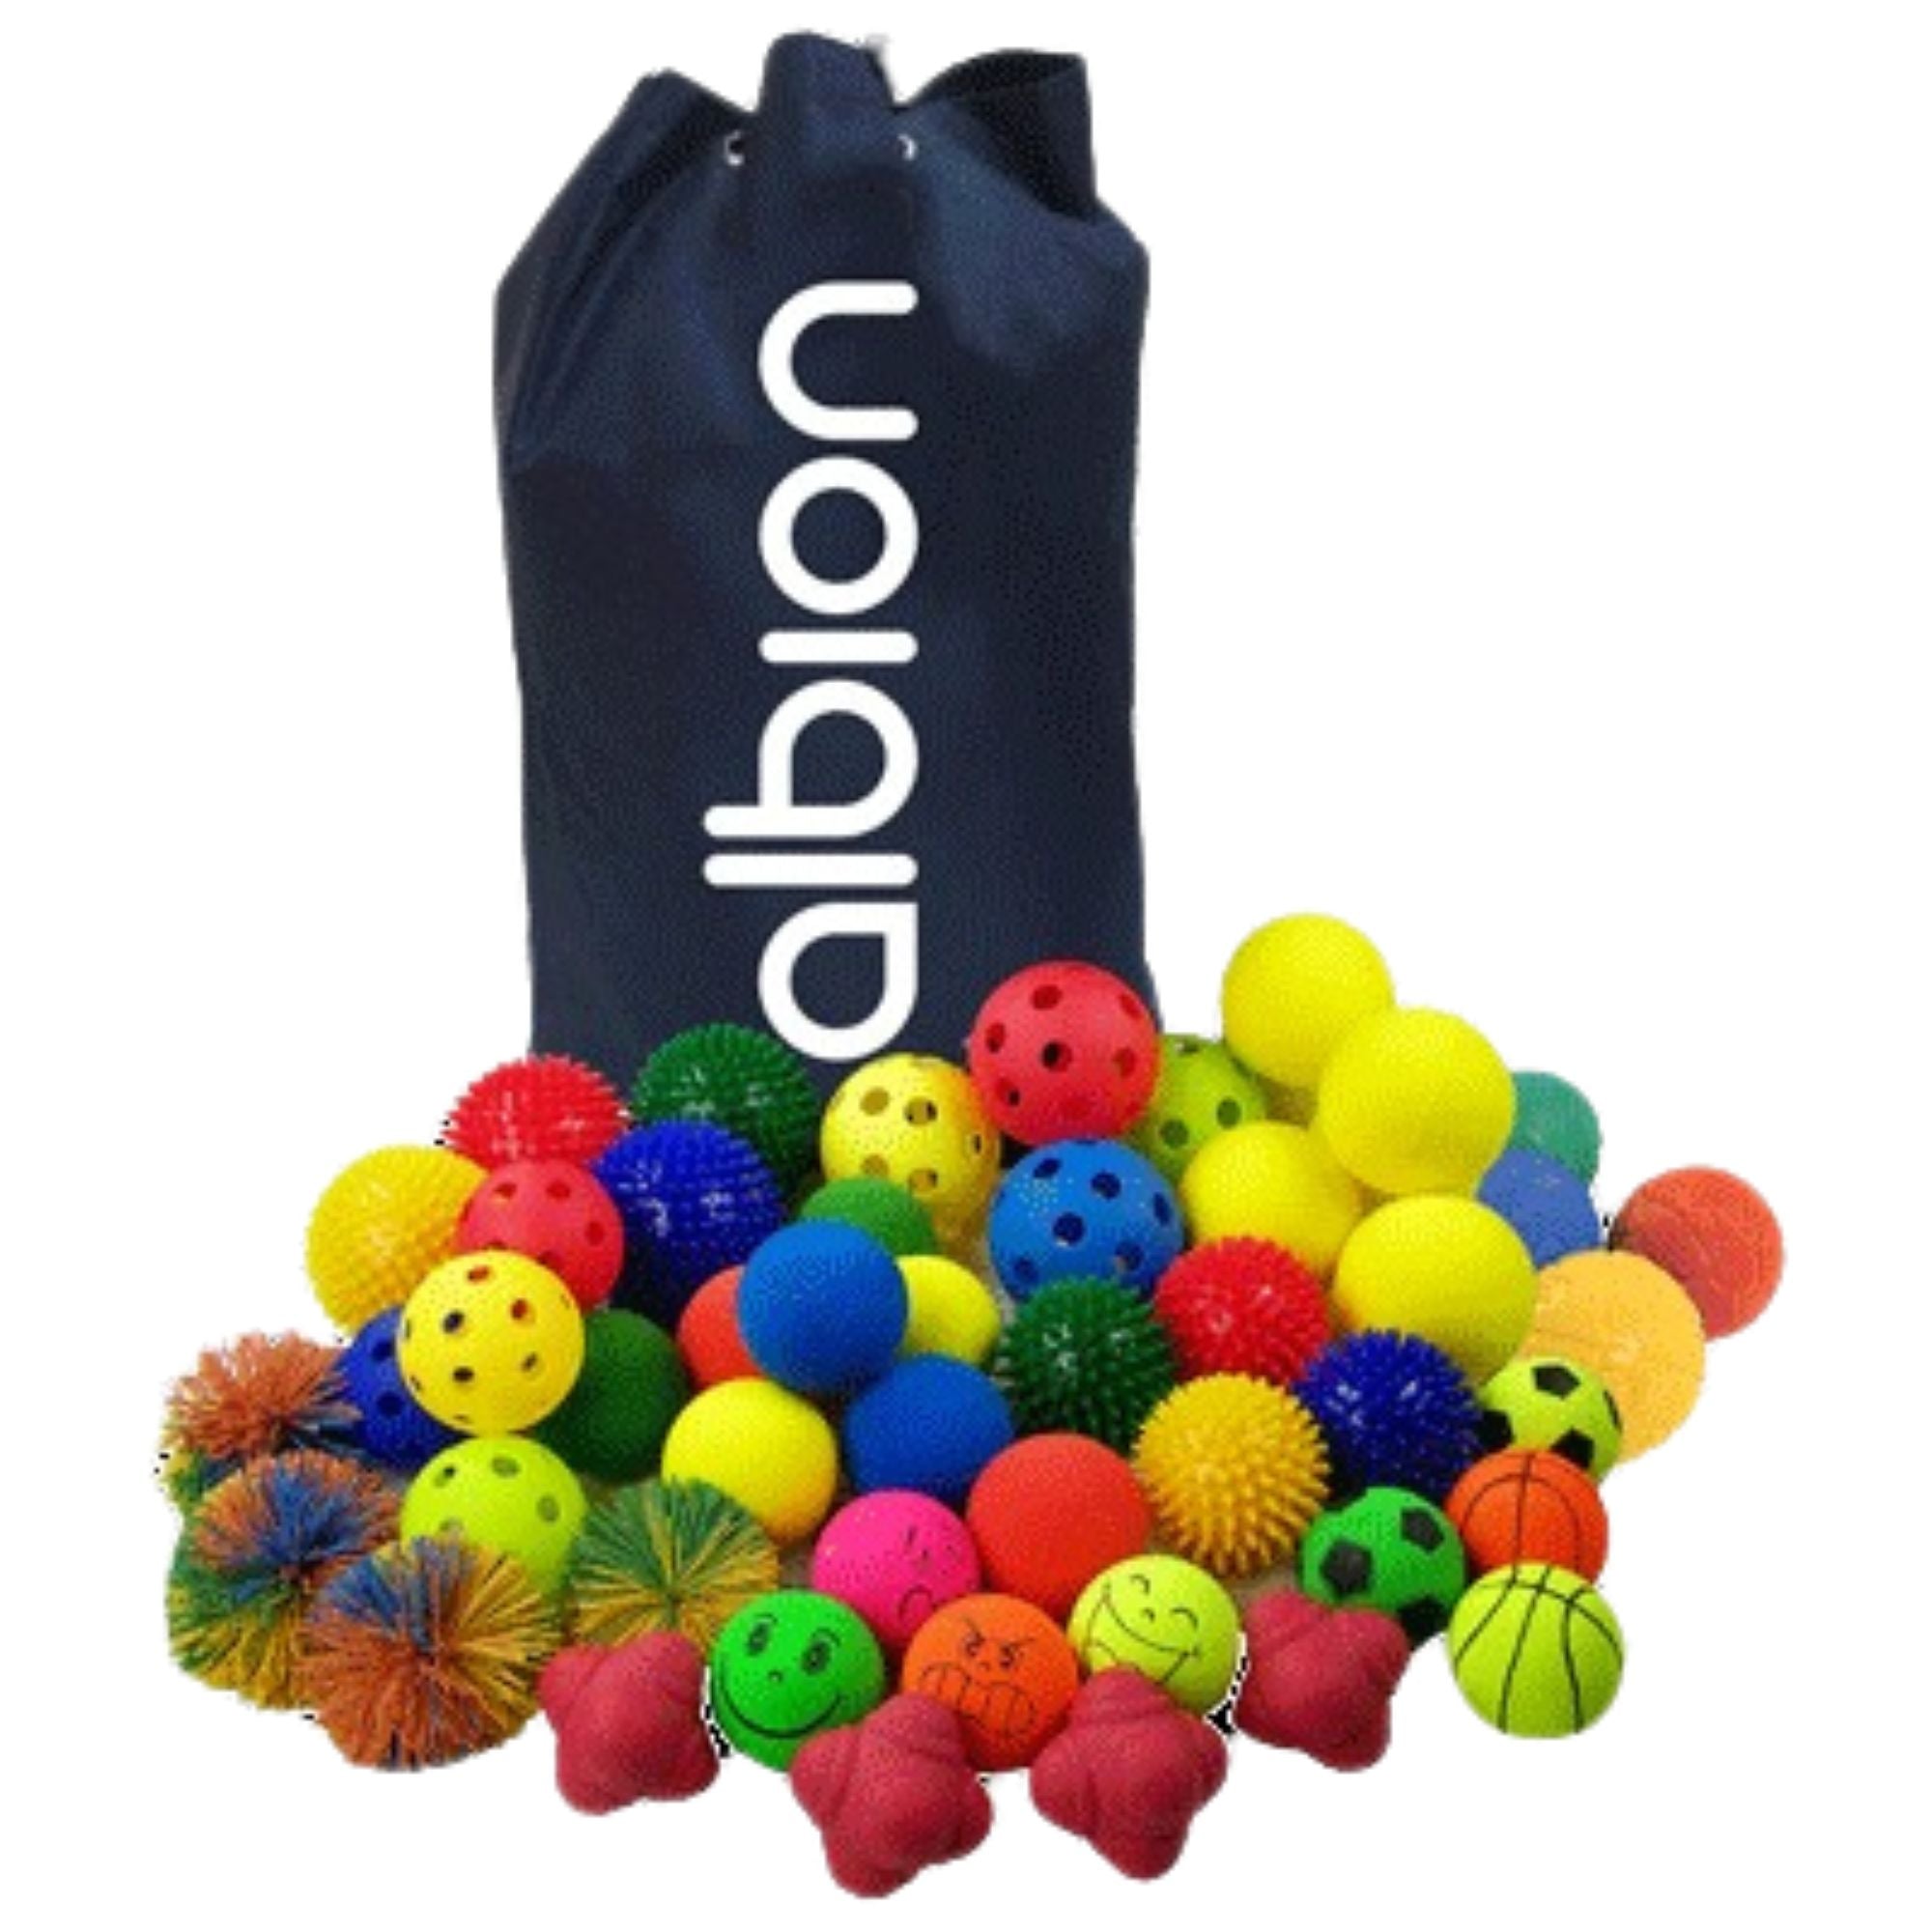 GetSetGo Mini Ball Pack, The GetSetGo Mini Ball Pack offers a versatile and comprehensive selection of balls, designed to meet the needs of children across different age groups and skill levels. Here's a breakdown of its contents and how it can benefit educational settings: Components: Standard Balls for General Play: 4 Perforated Balls 7cm 8 Foam Sponge Balls 7cm 6 Foam Sponge Balls 9cm 4 Perforated Balls 9cm Specialized Balls for Skill Development: 4 Engraving Balls: Useful for teaching grip and catch ski